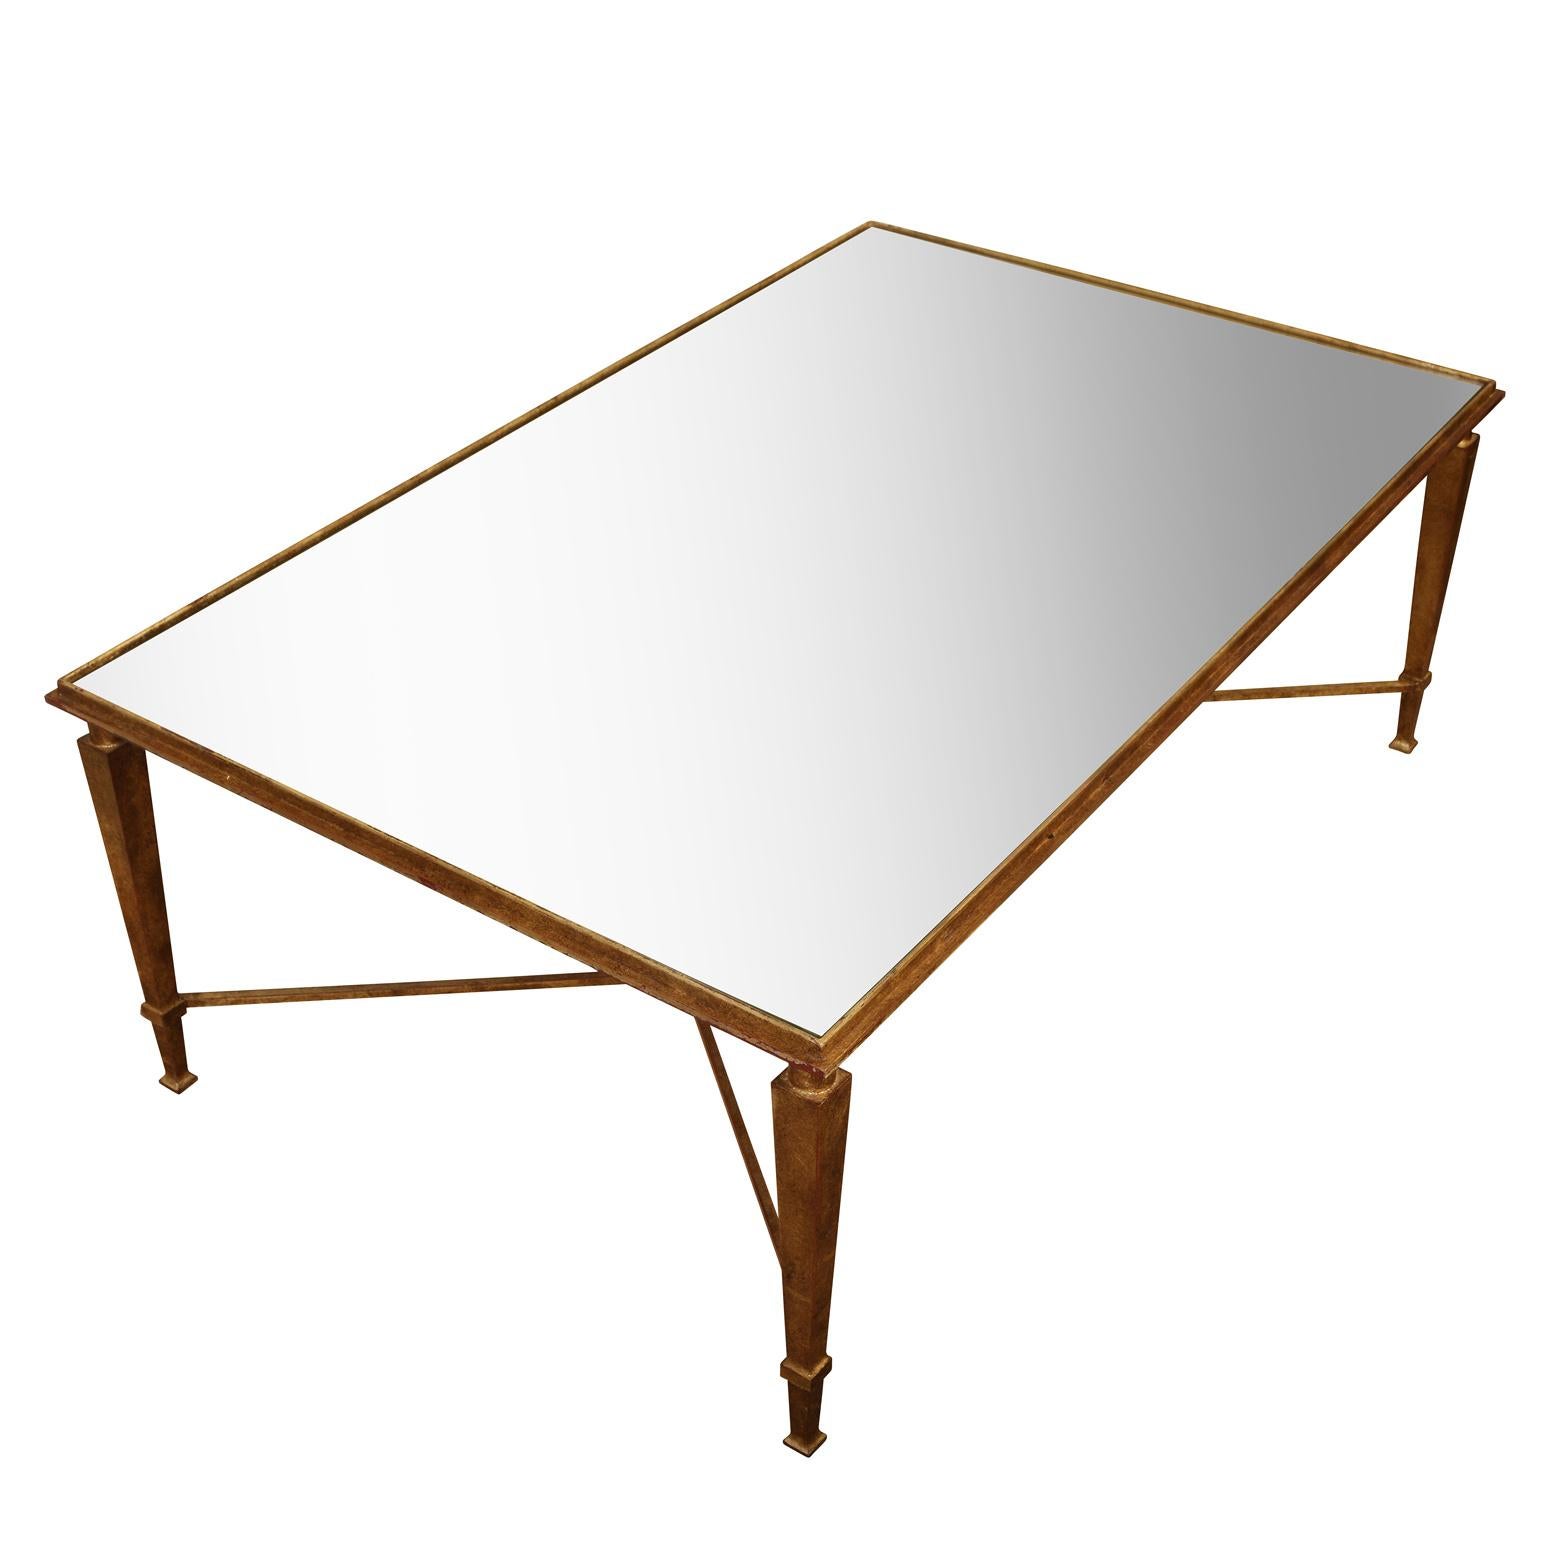 French style gilt metal coffee table with inset mirrored top and geometric X base and tapered legs.